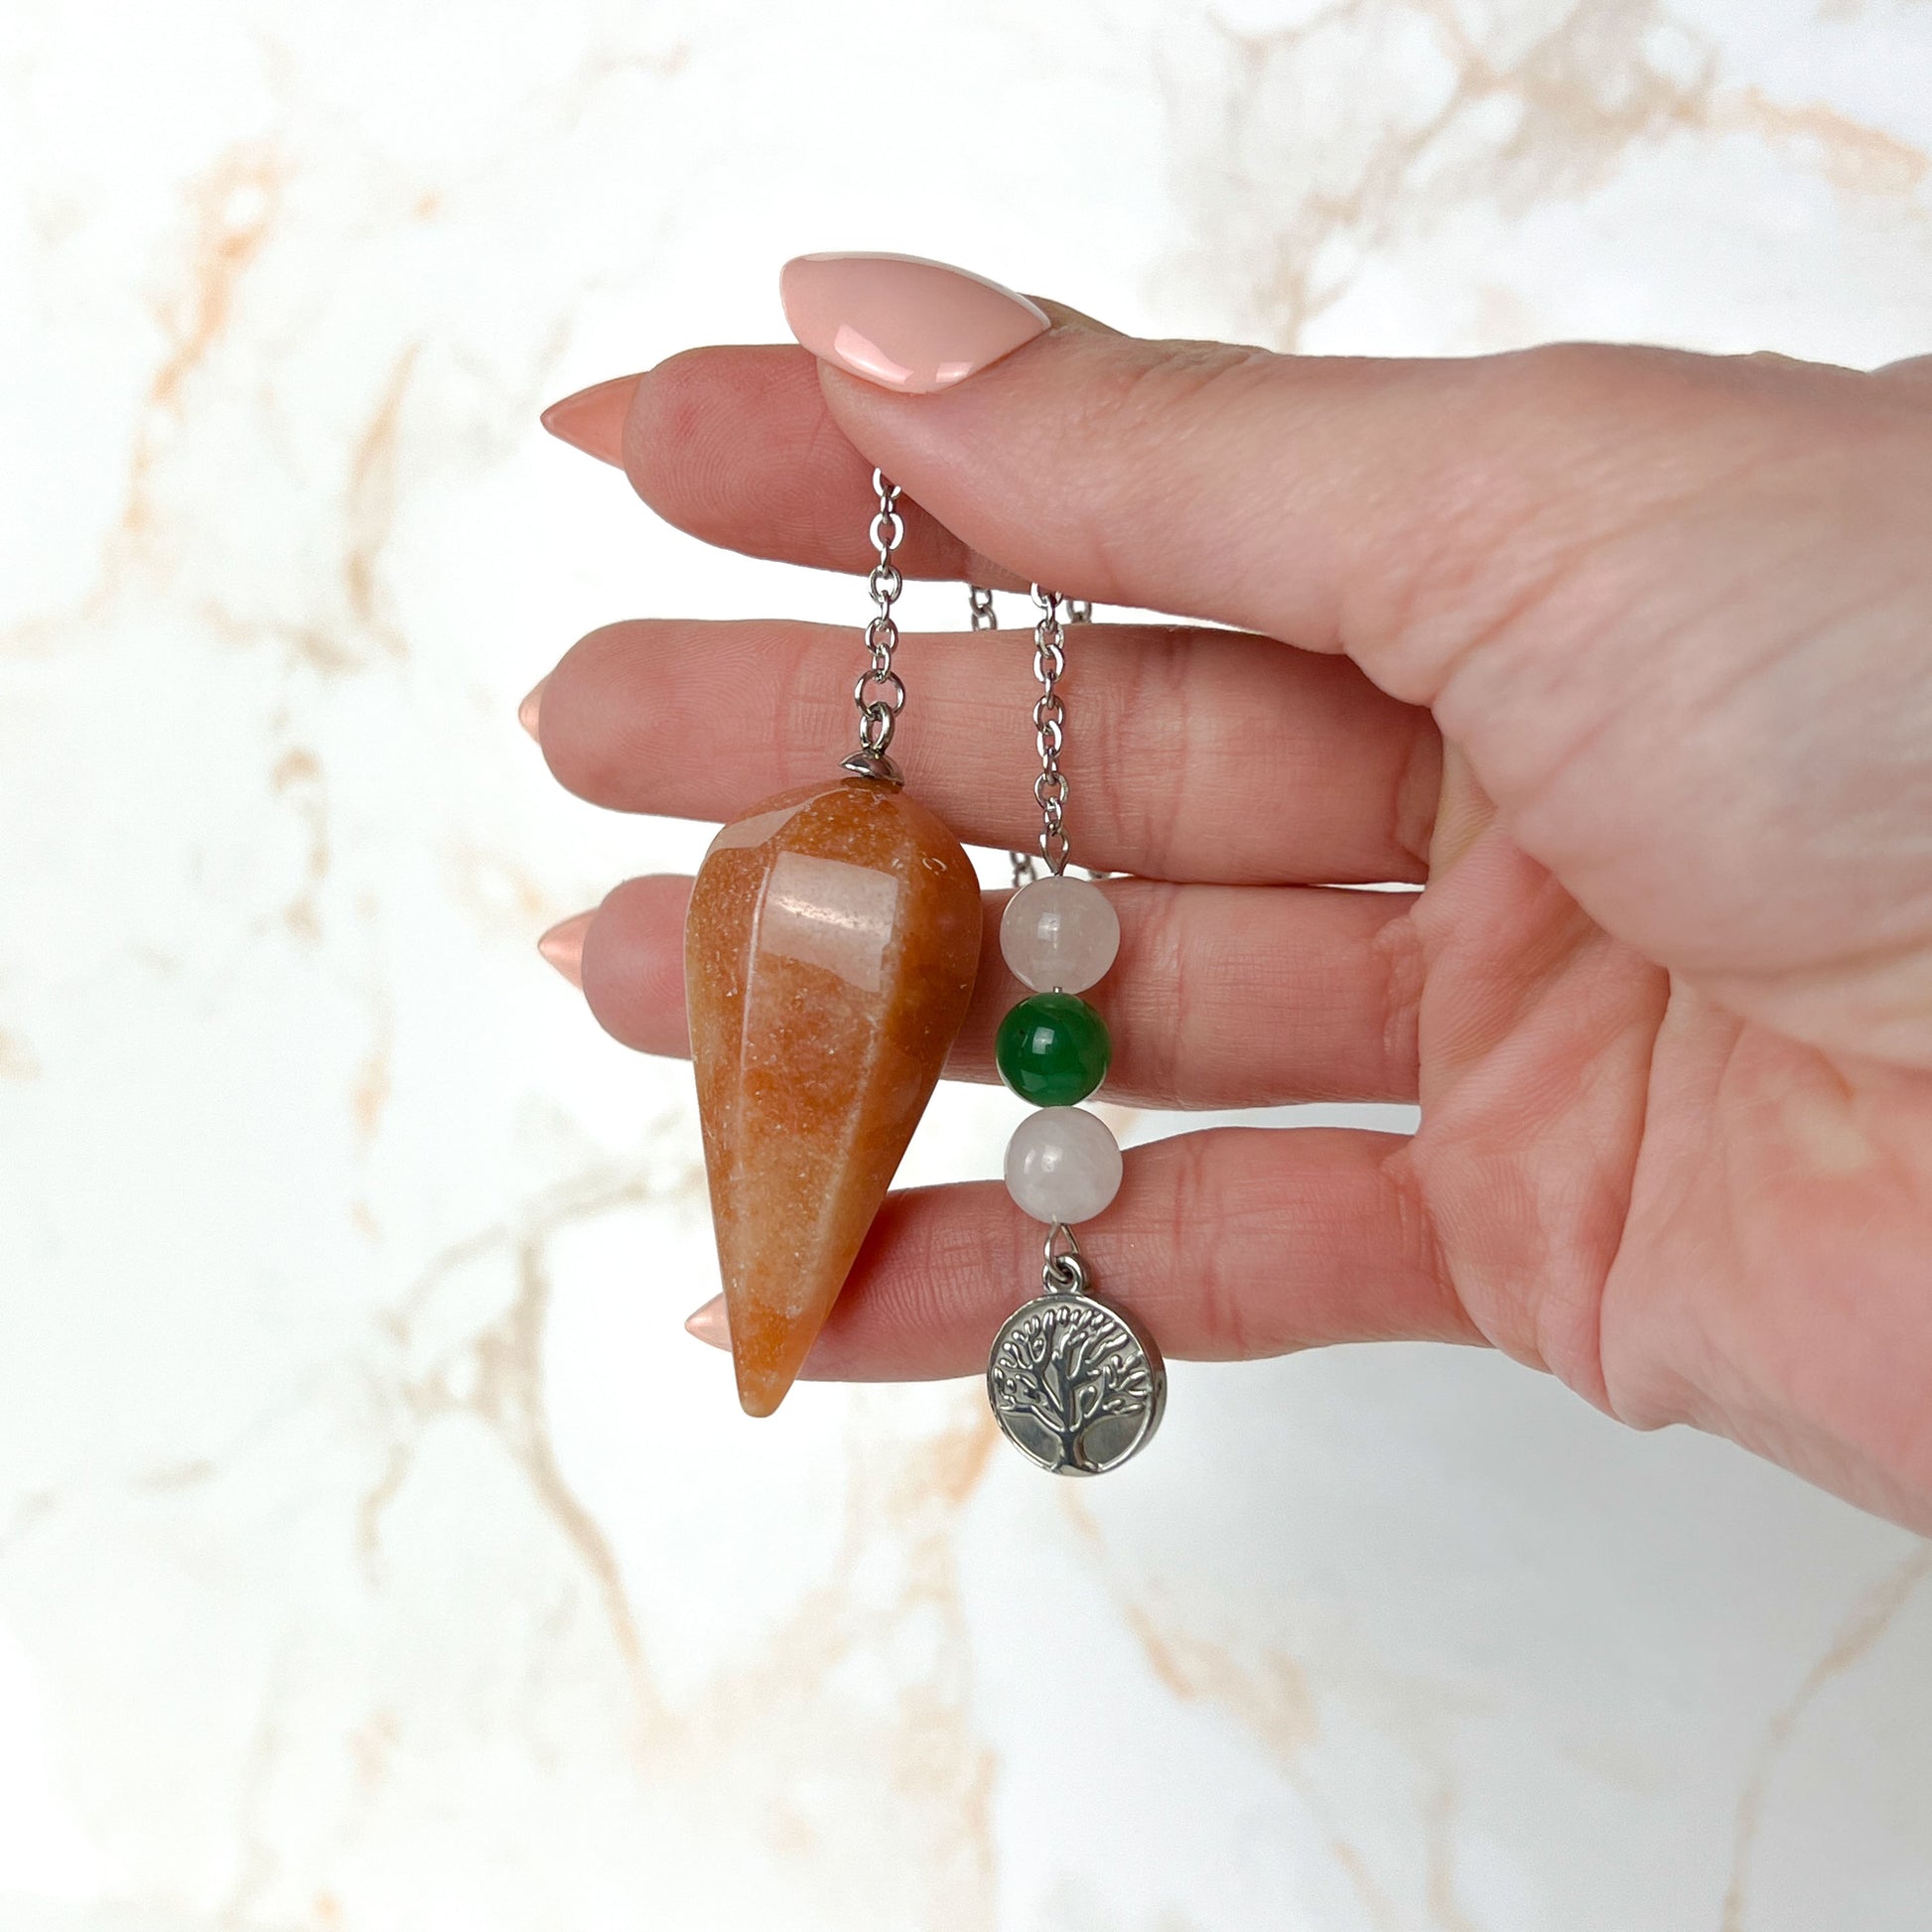 Orange and green aventurine, clear quartz, and tree of life stainless steel pendulum Baguette Magick